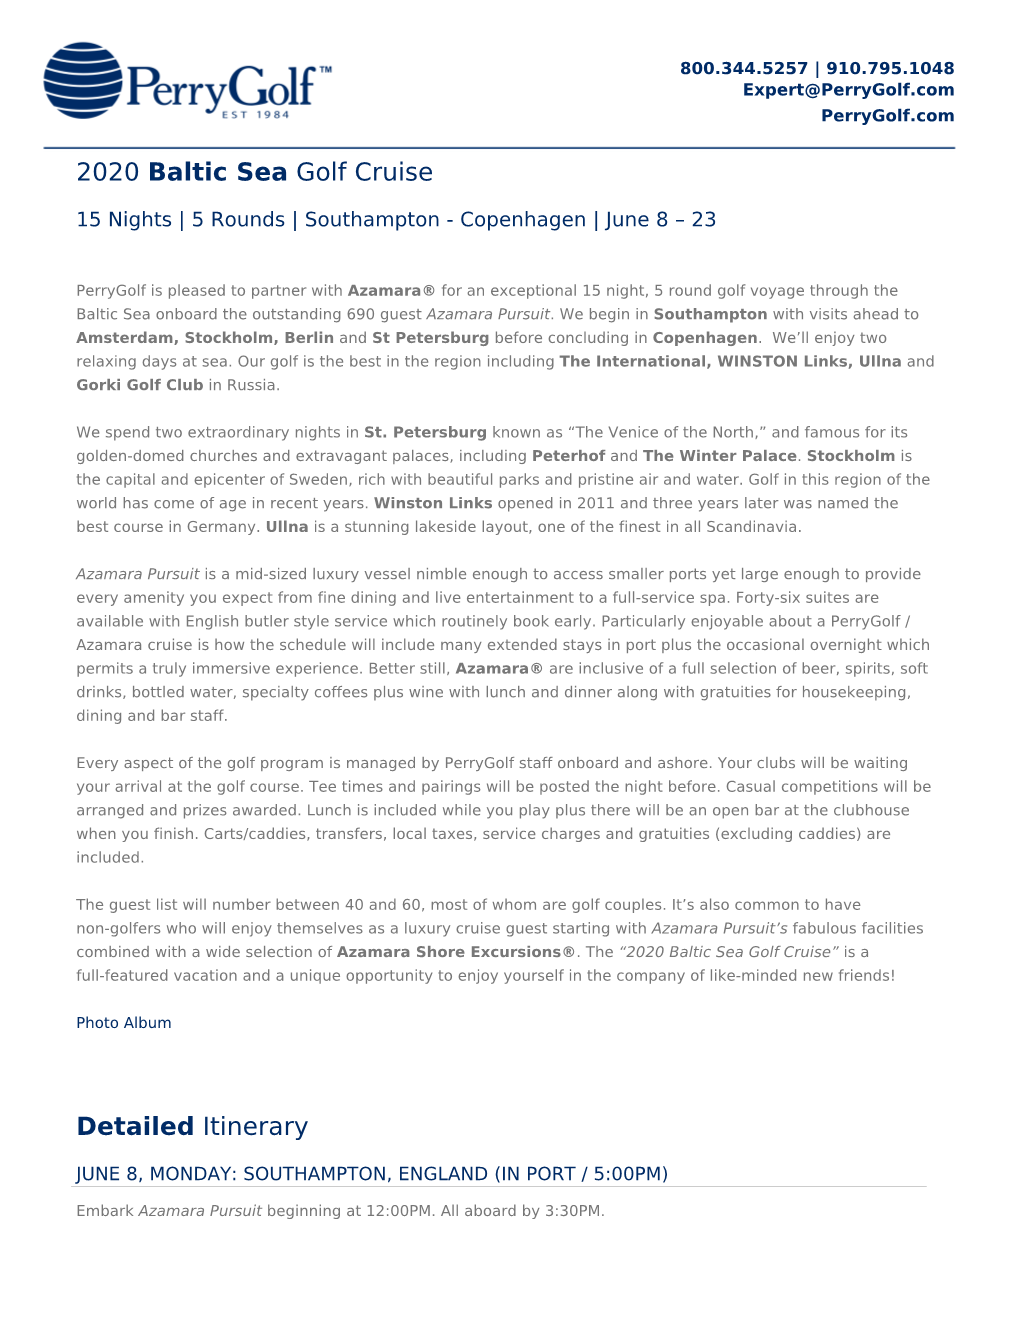 2020 Baltic Sea Golf Cruise Detailed Itinerary